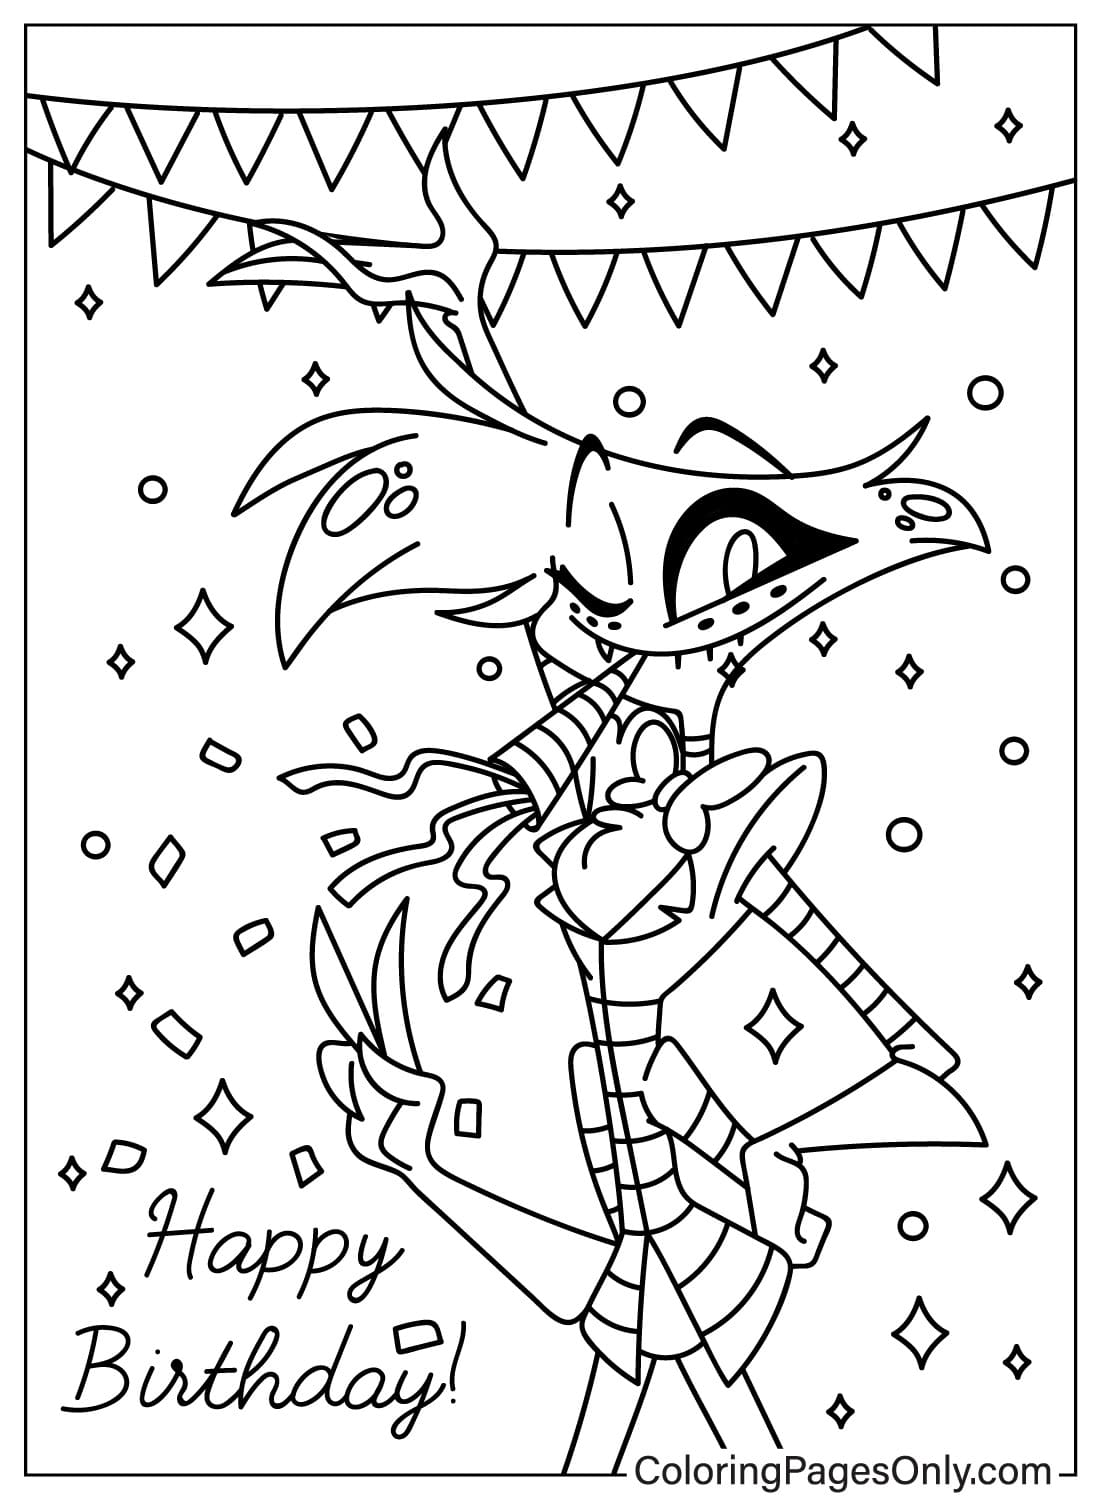 Happy Birthday Angel Dust Coloring Page from Angel Dust